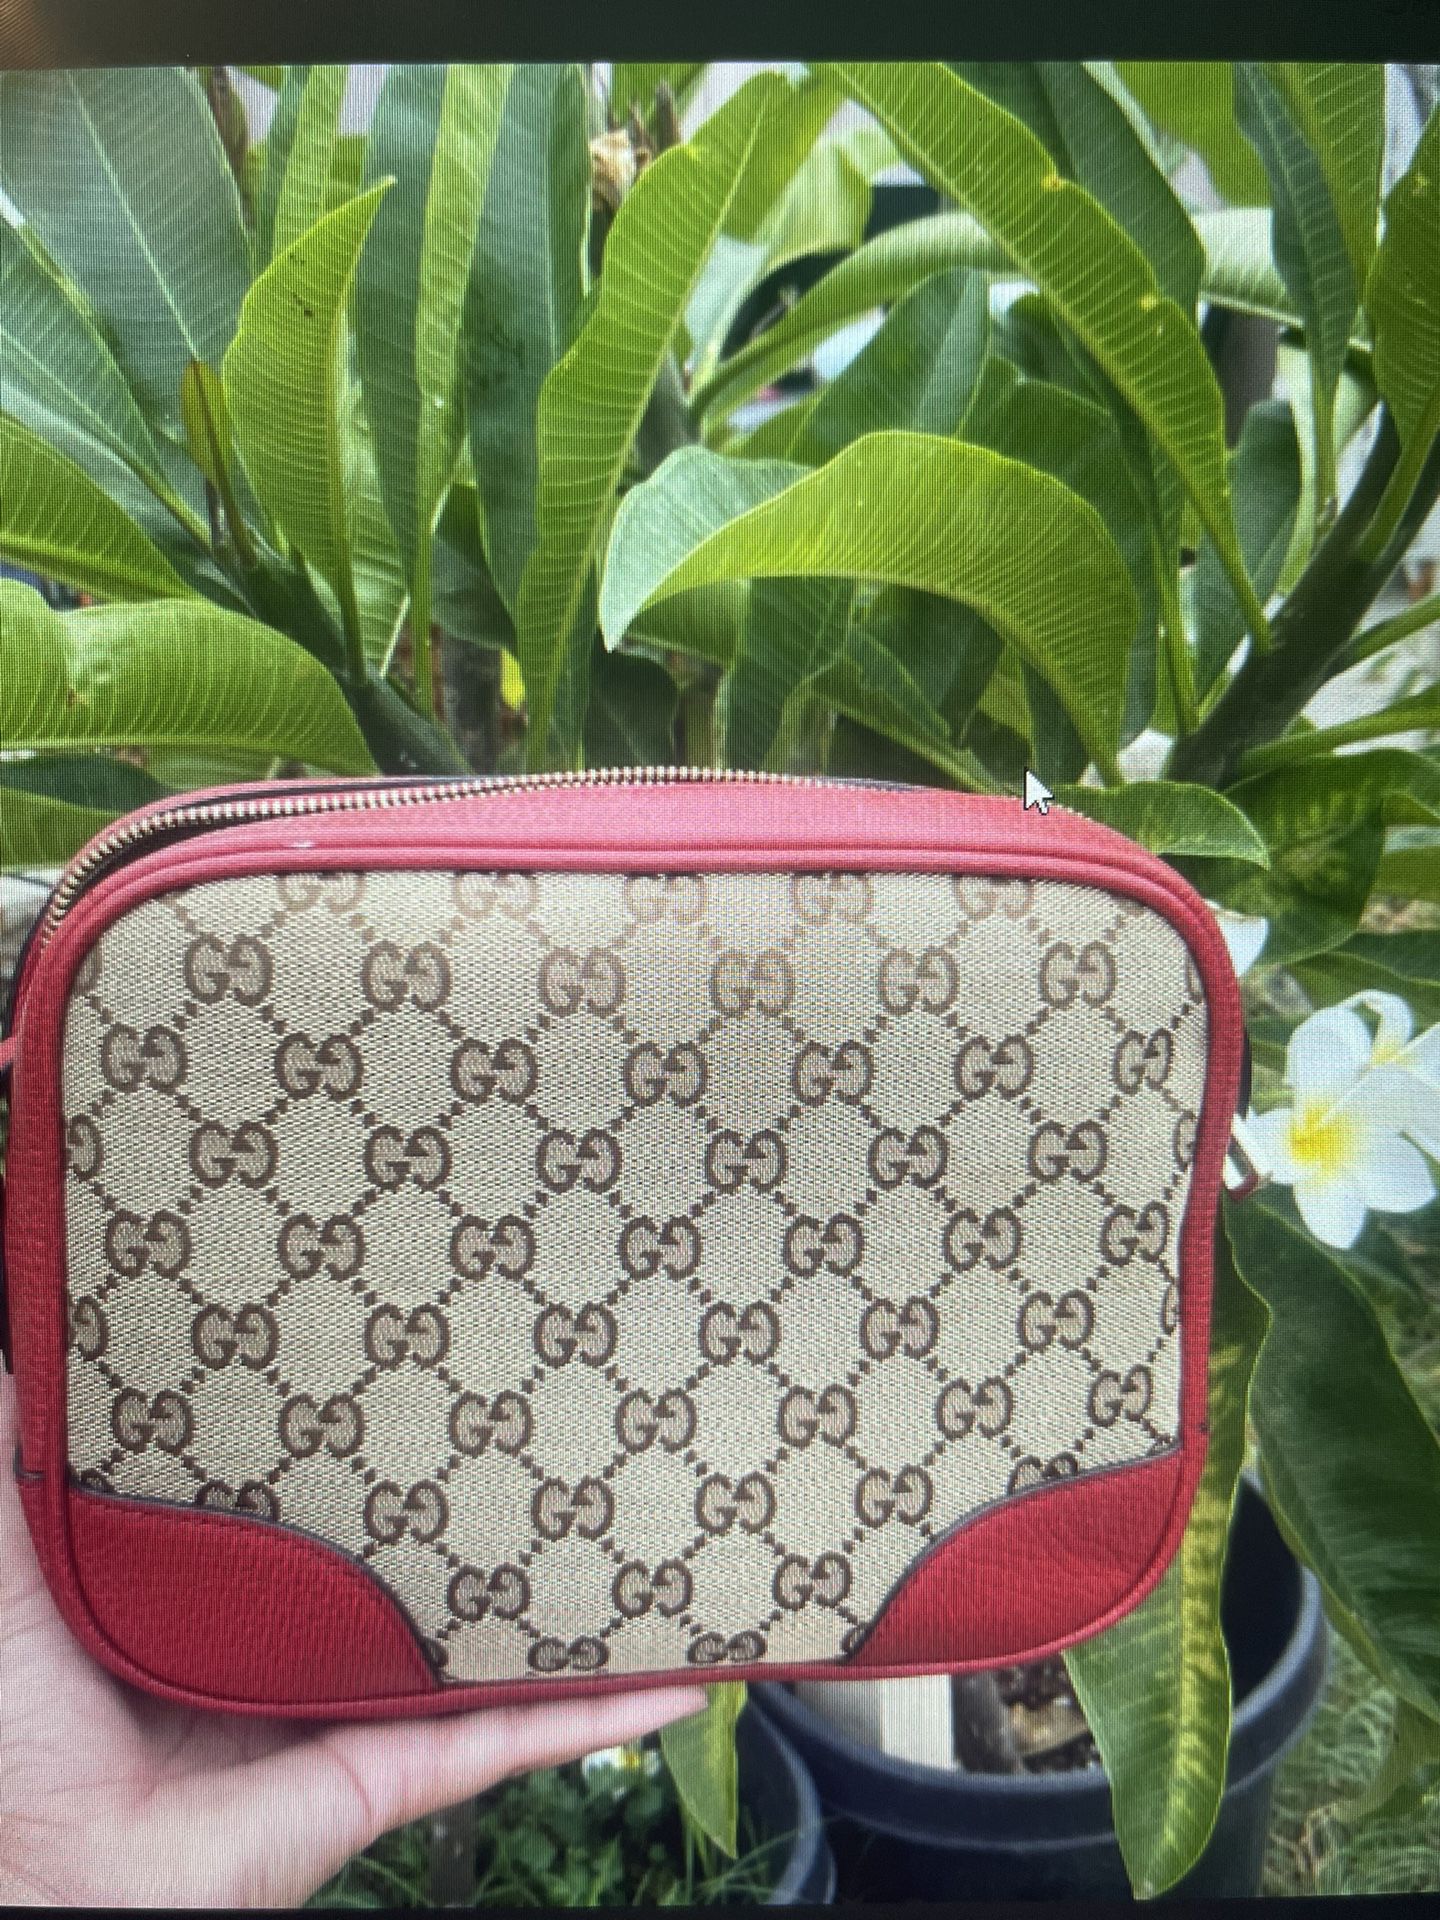 Authentic Gucci Leather Purse 